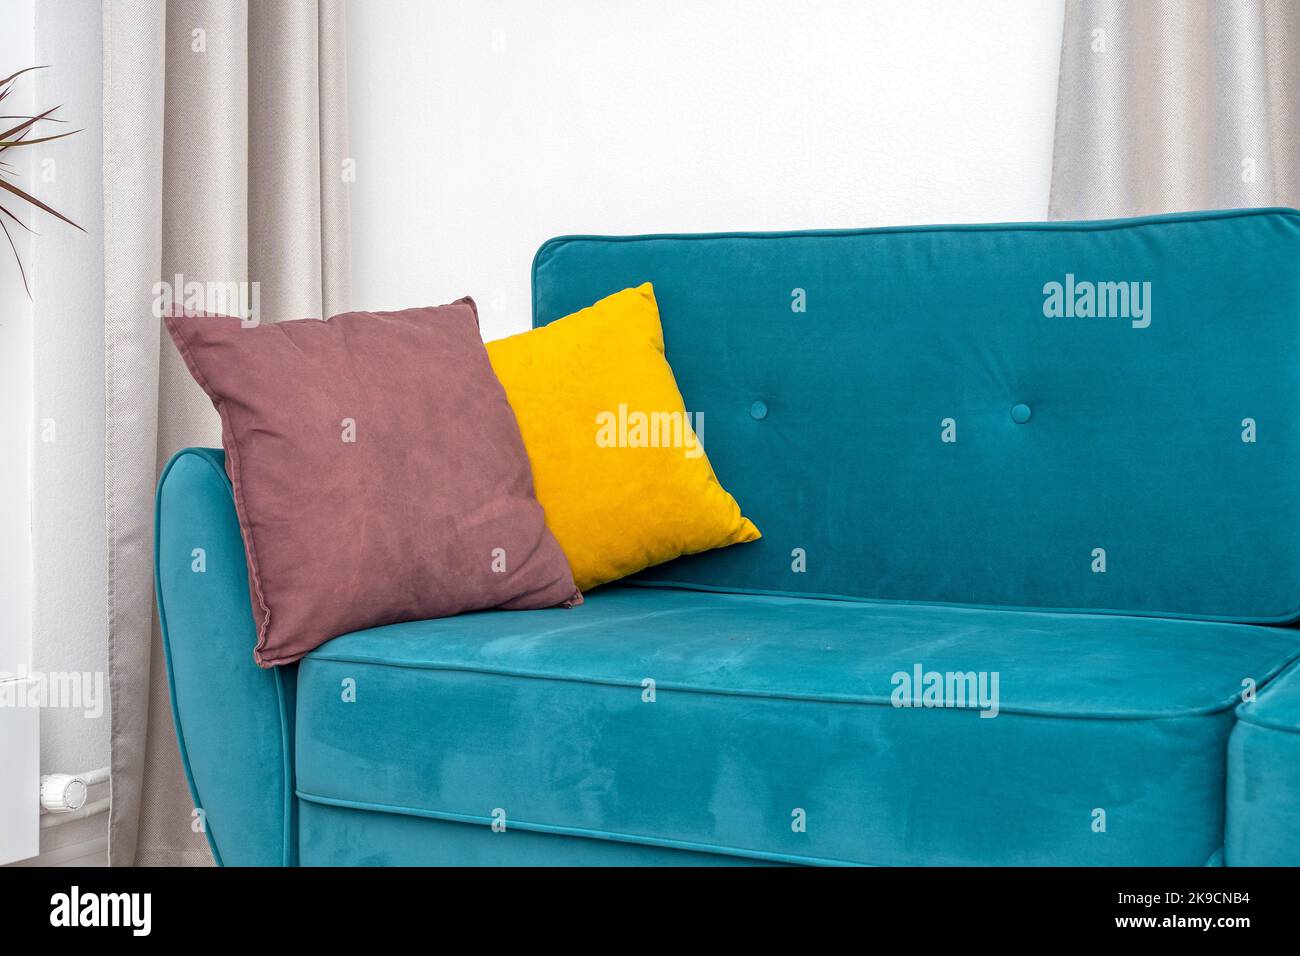 Bright yellow pillow on blue, turquoise sofa or couch, interior of the comfortable residential room Stock Photo